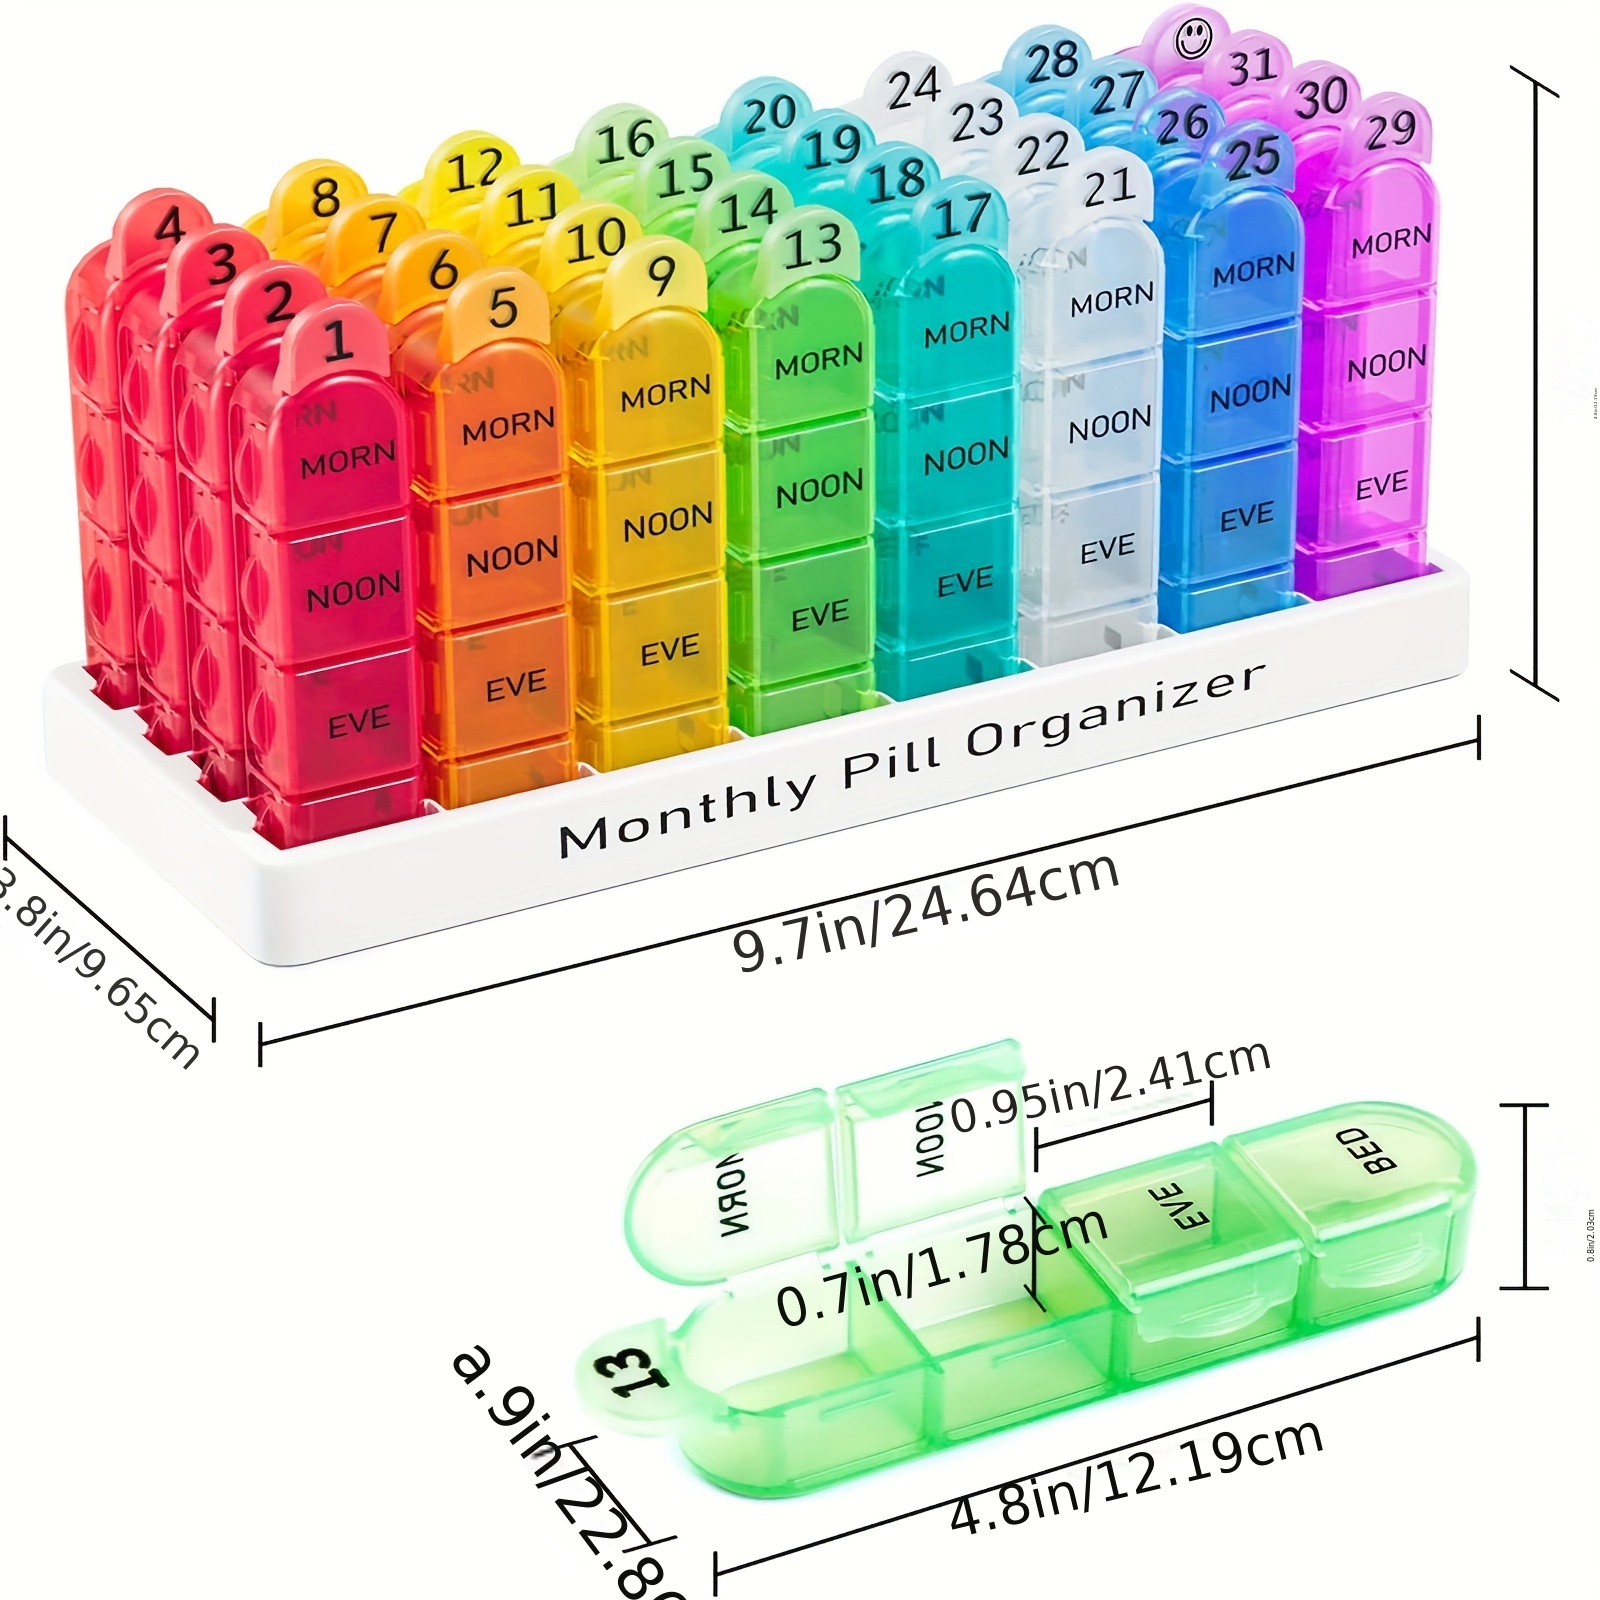 XL Large Pill Organizer 4 Times a Day 7 Day Daily Pill Boxes Organizers  Weekly Travel Pill Case Medication Organizer with 28 Big Compartments for  Medicine Vitamin and Supplements Rainbow